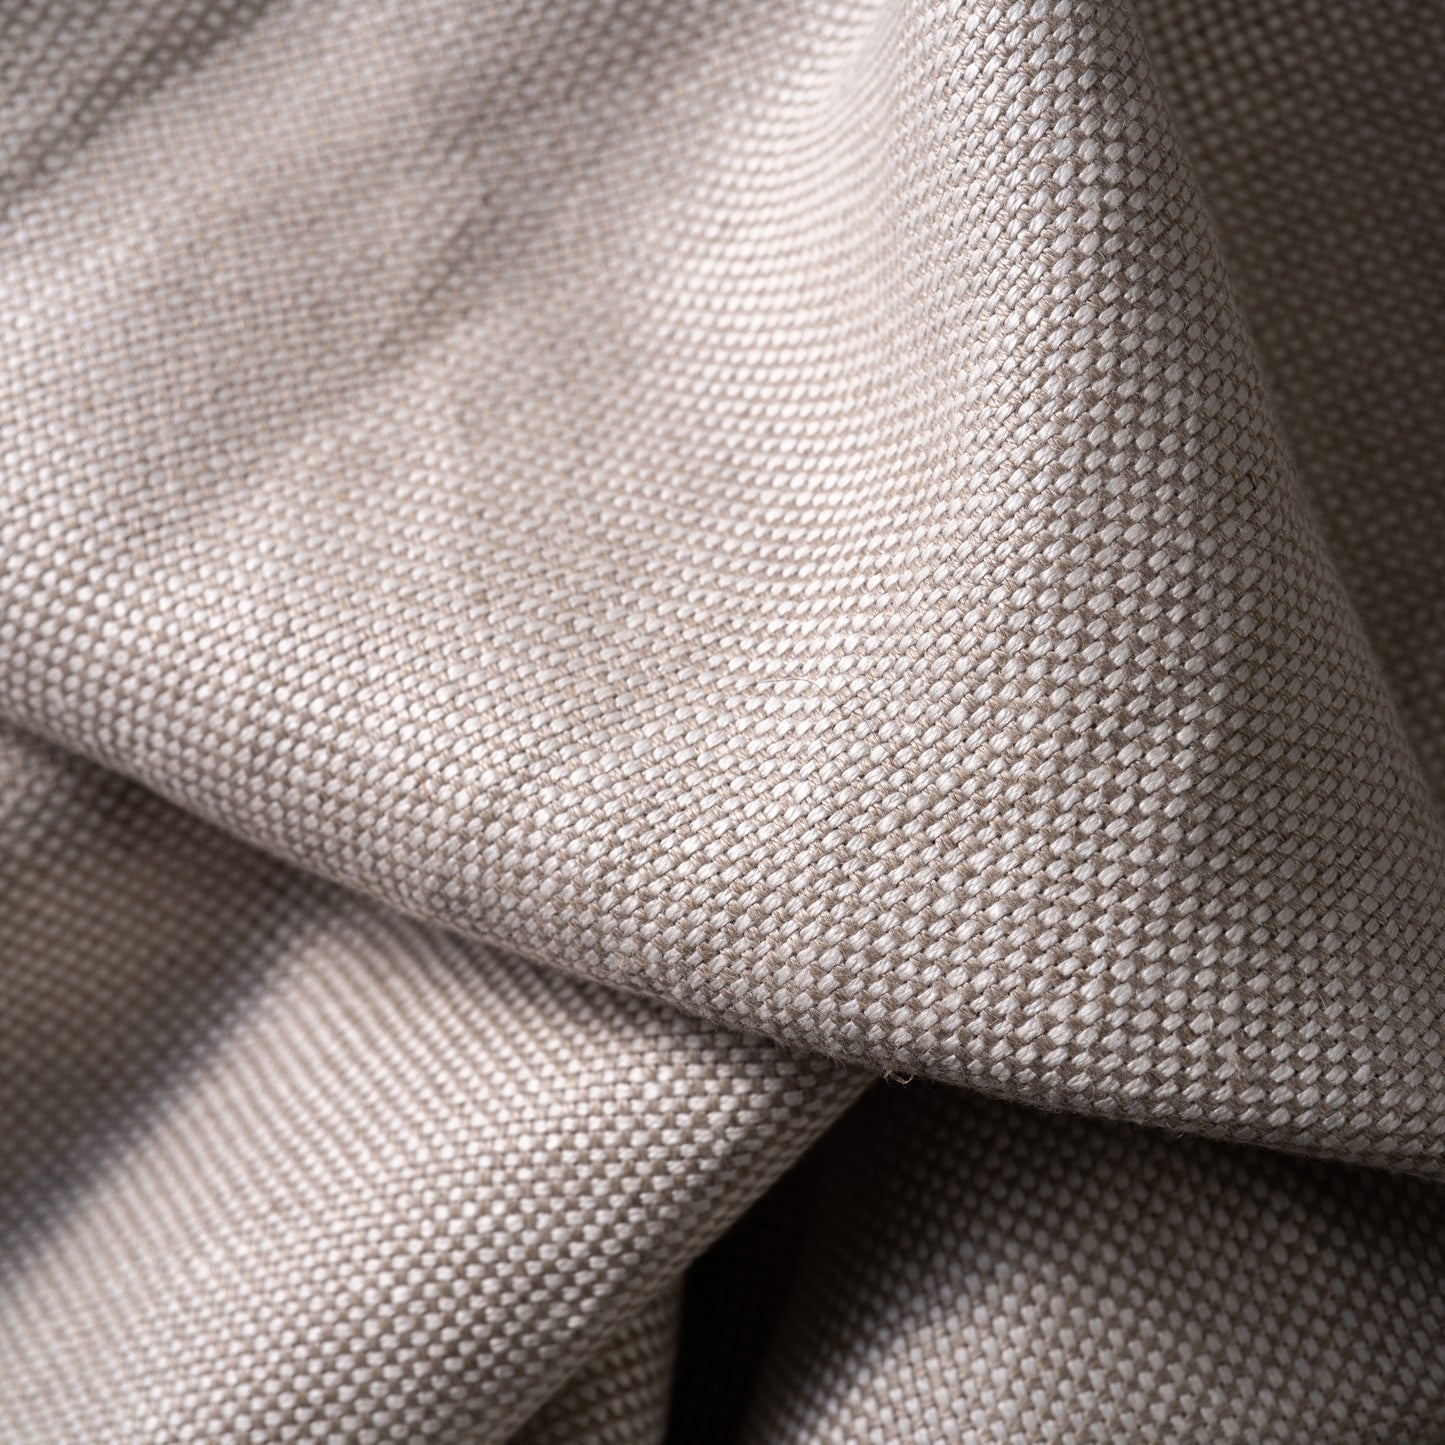 14.5 oz/sq yard 100% Upholstery Weight Linen in Mixed Natural Swatch